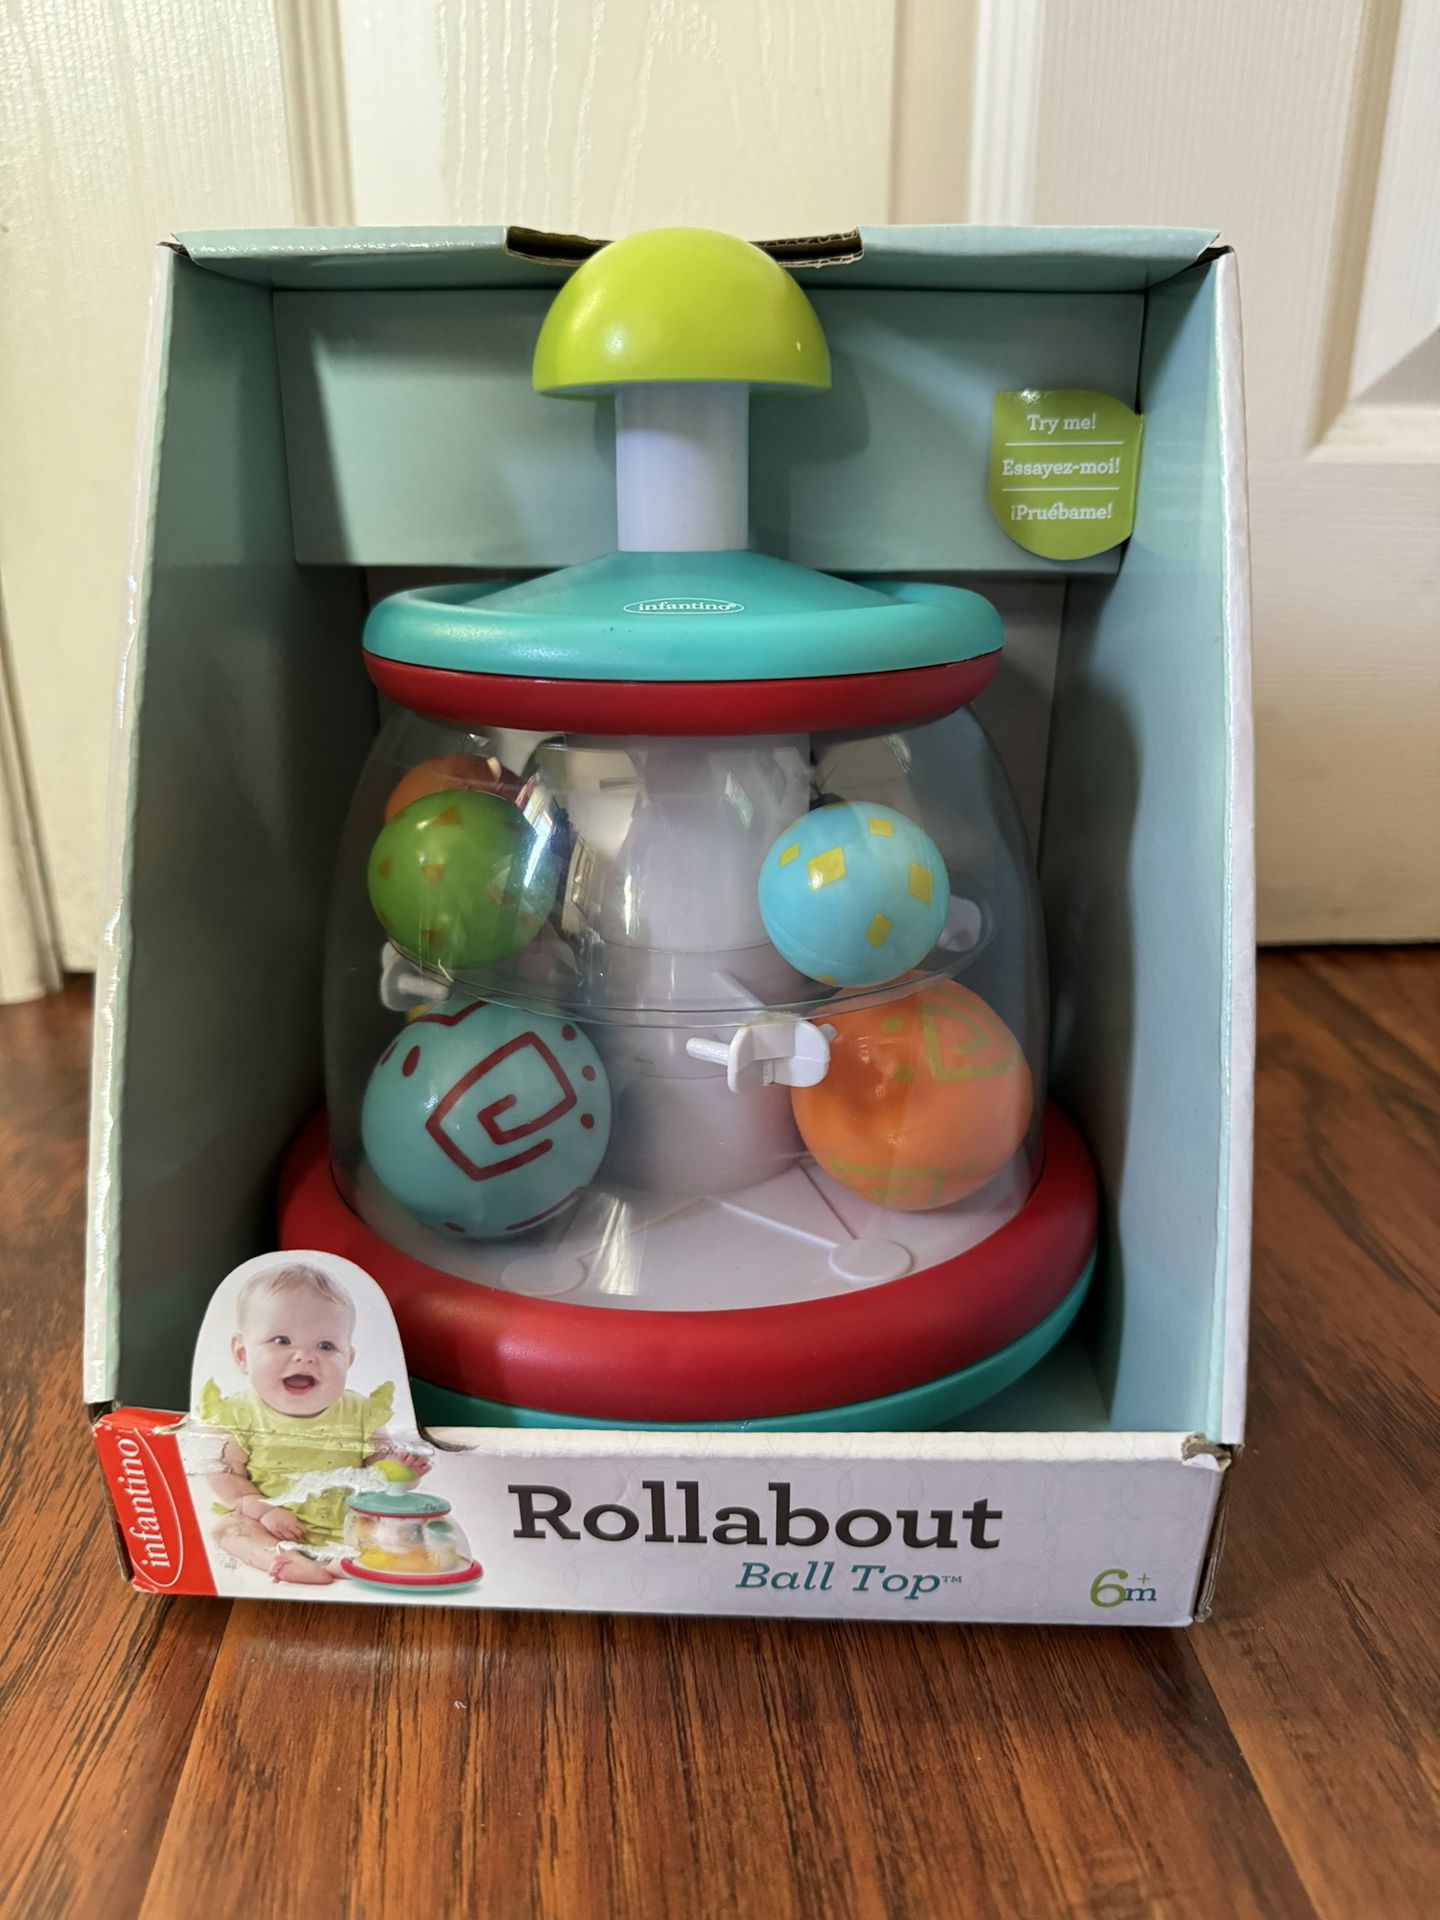 Baby Toy Rollabout Ball Top